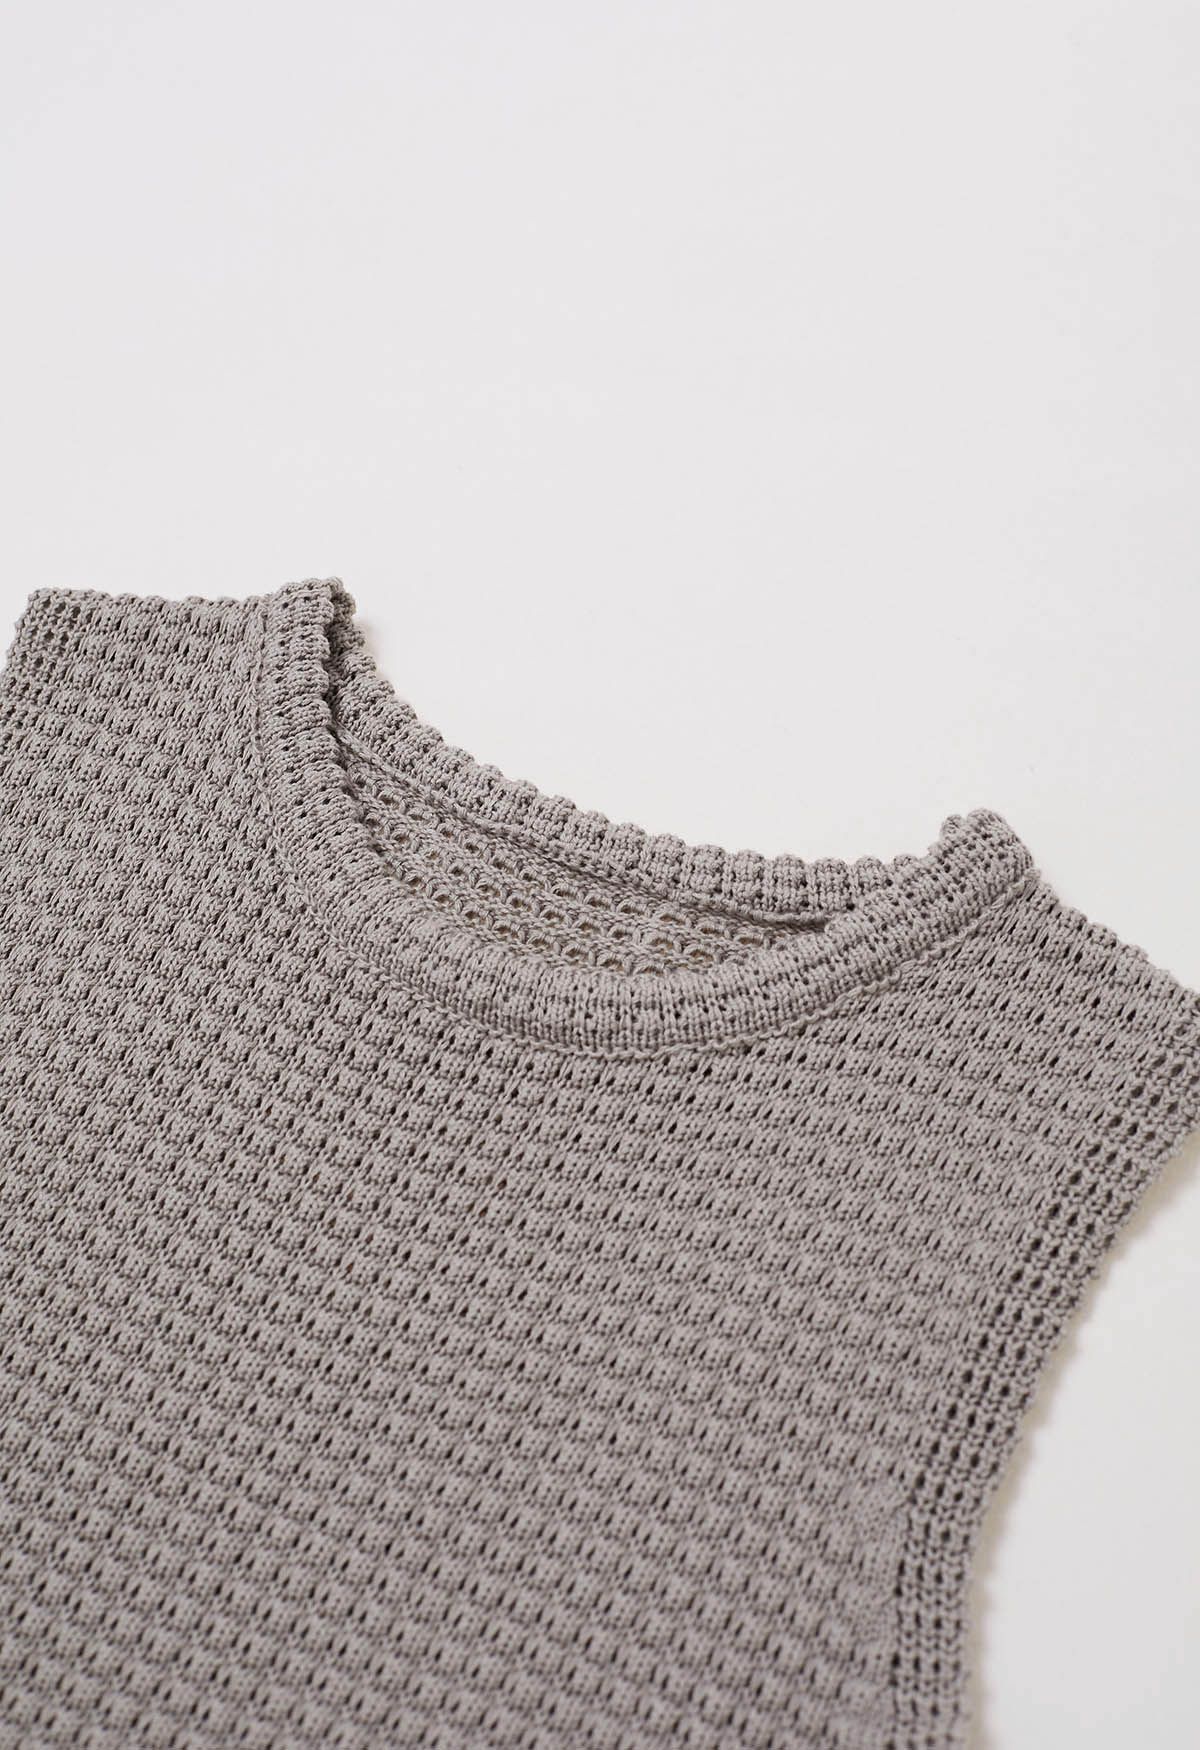 Solid Color Openwork Knit Sleeveless Top in Taupe